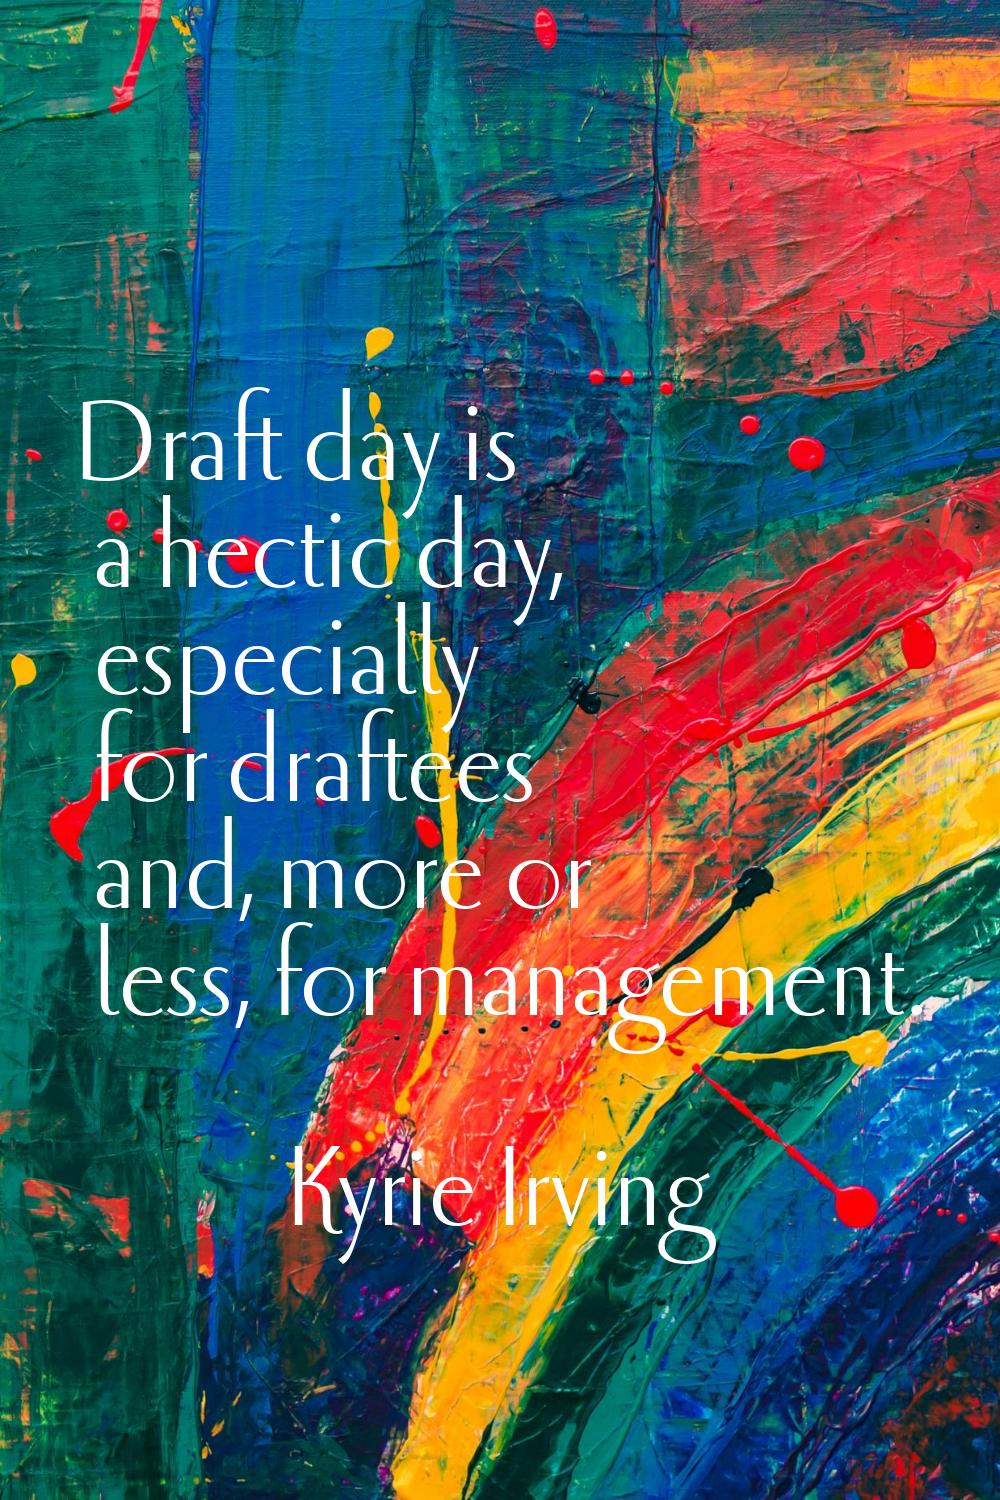 Draft day is a hectic day, especially for draftees and, more or less, for management.